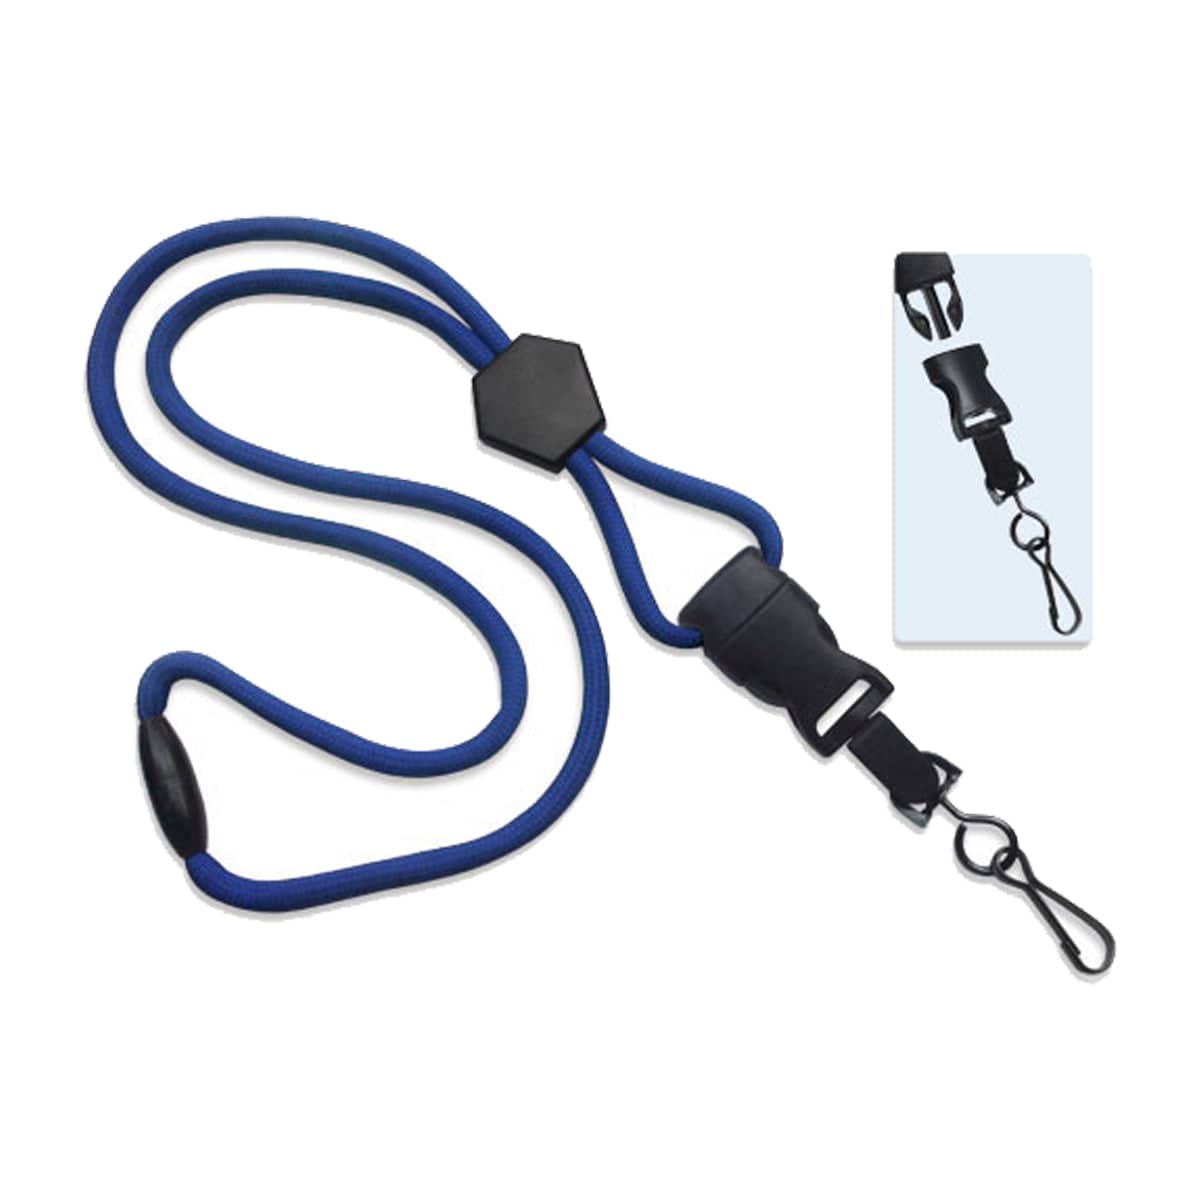 Heavy Duty Lanyard With Detachable Hook and more at